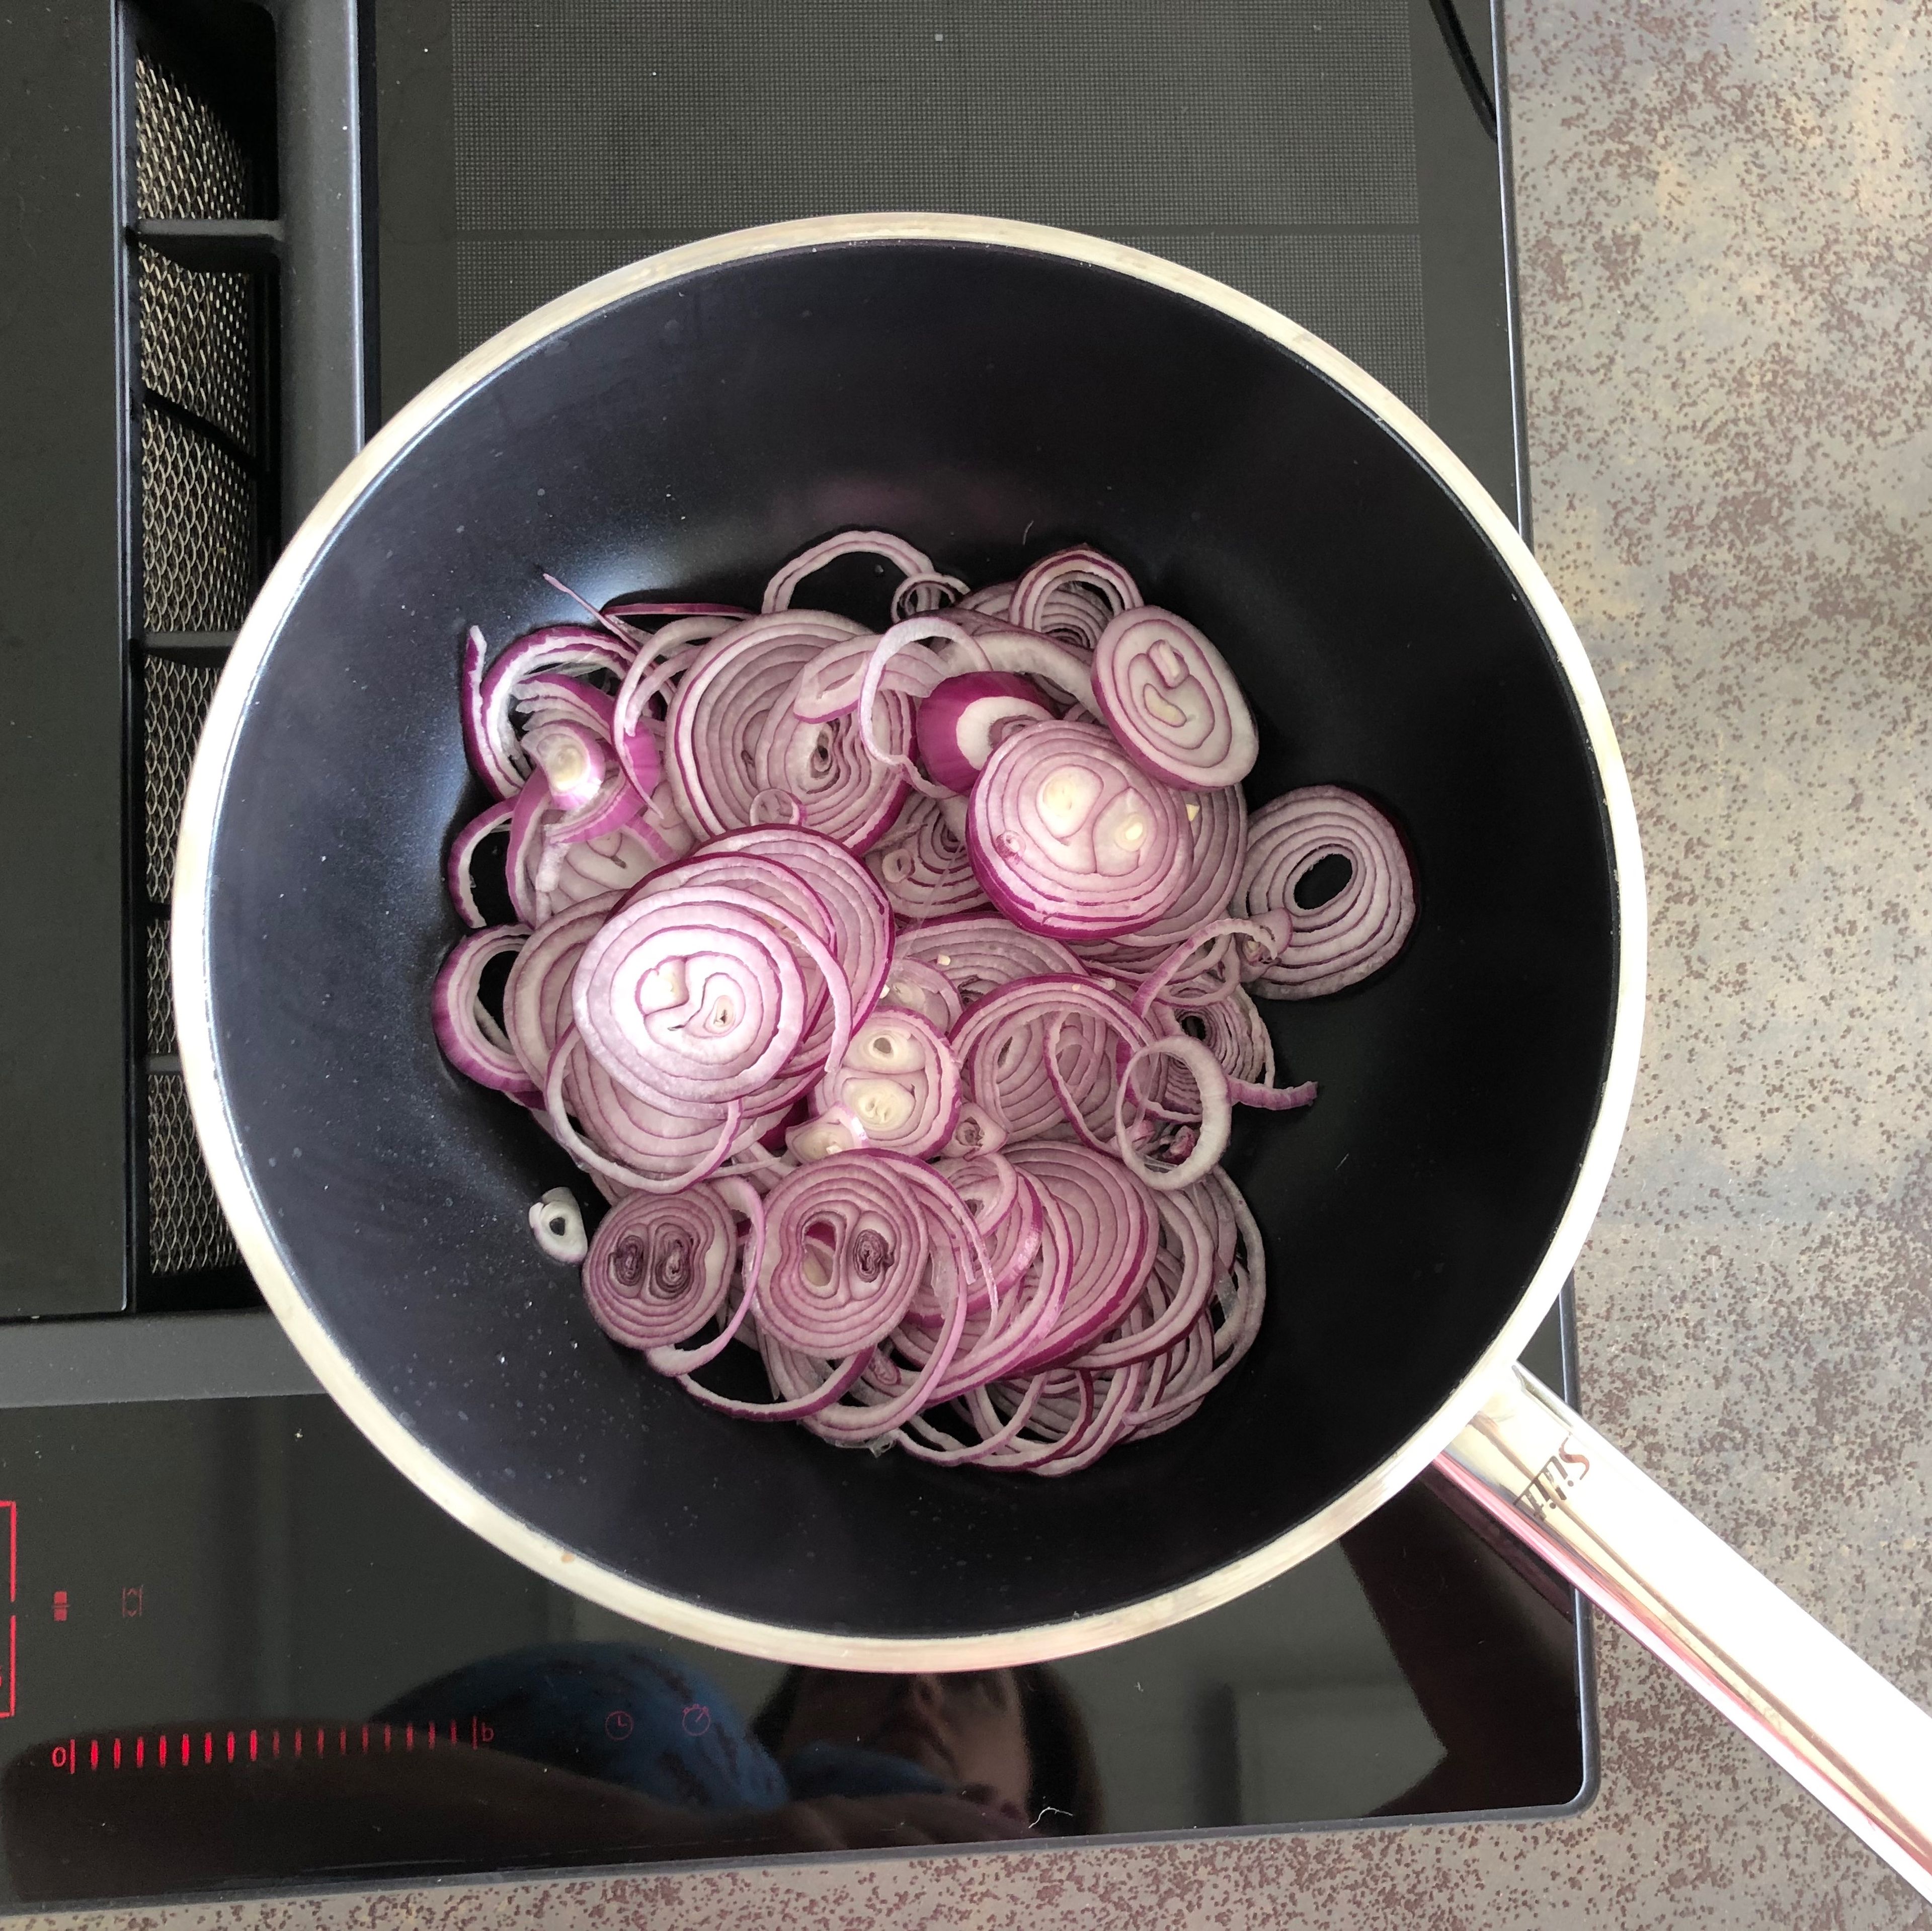 To make the onion, bacon, and chickpea topping, first slice the some of the onions, heat olive oil in a frying pan and sauté slowly over low heat, until very soft.